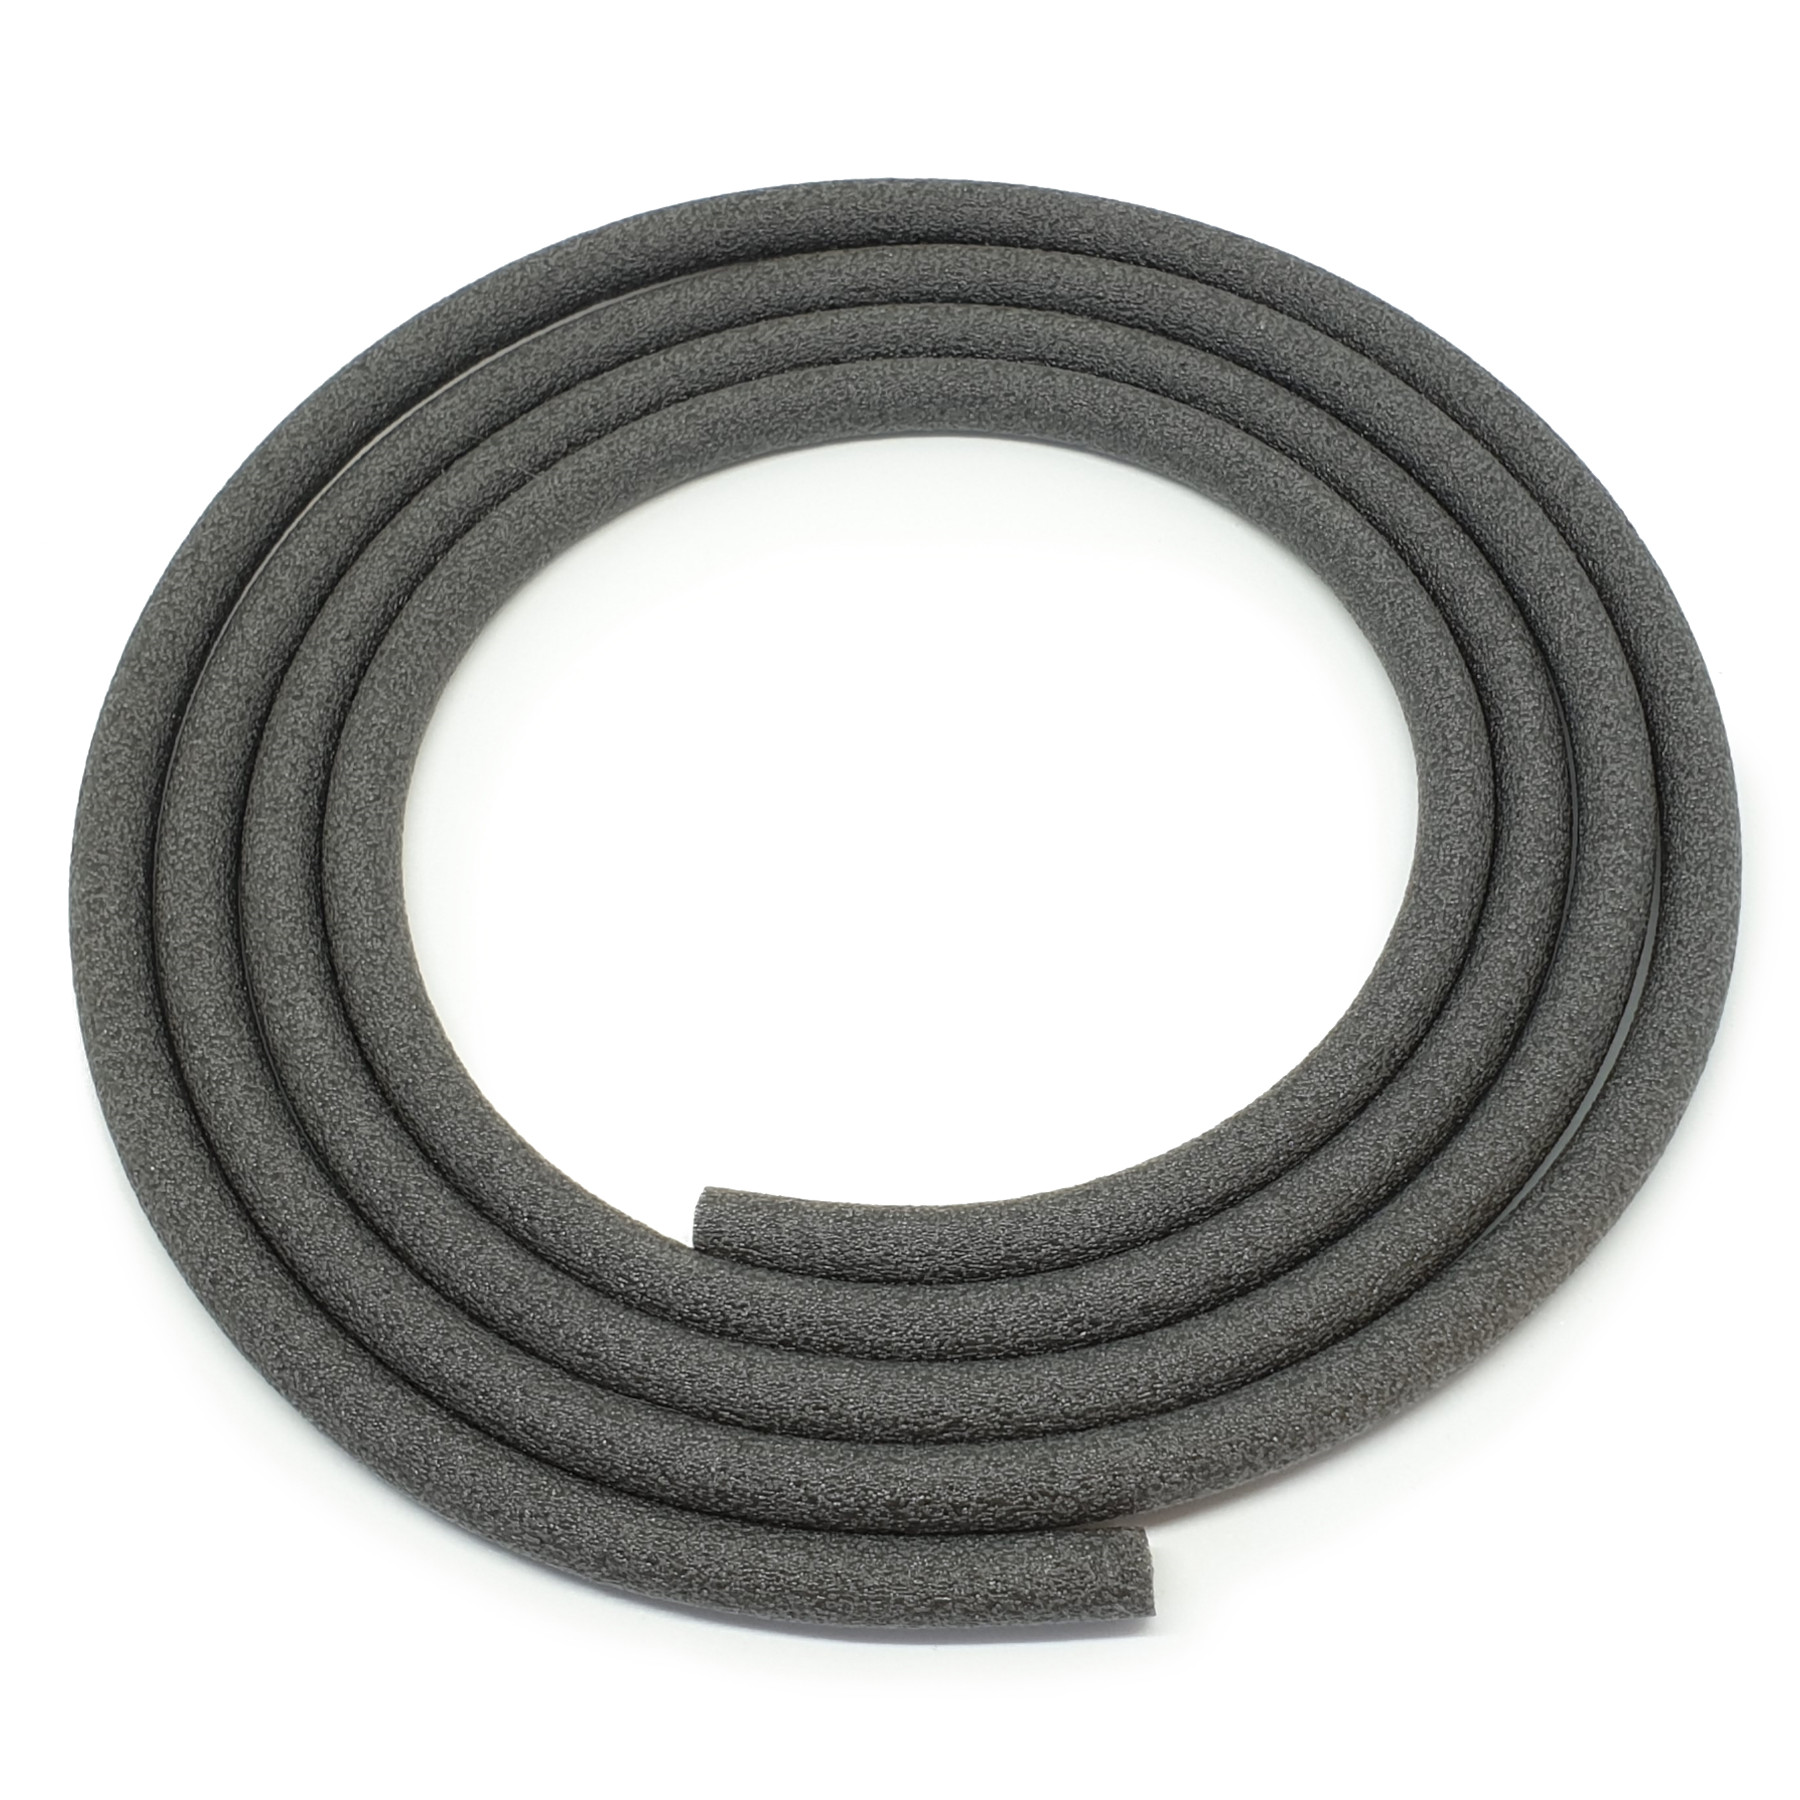 Picture of capgo Orange Line Noise Protection Foam Cover - for Shift Cable Housings - 2000 mm